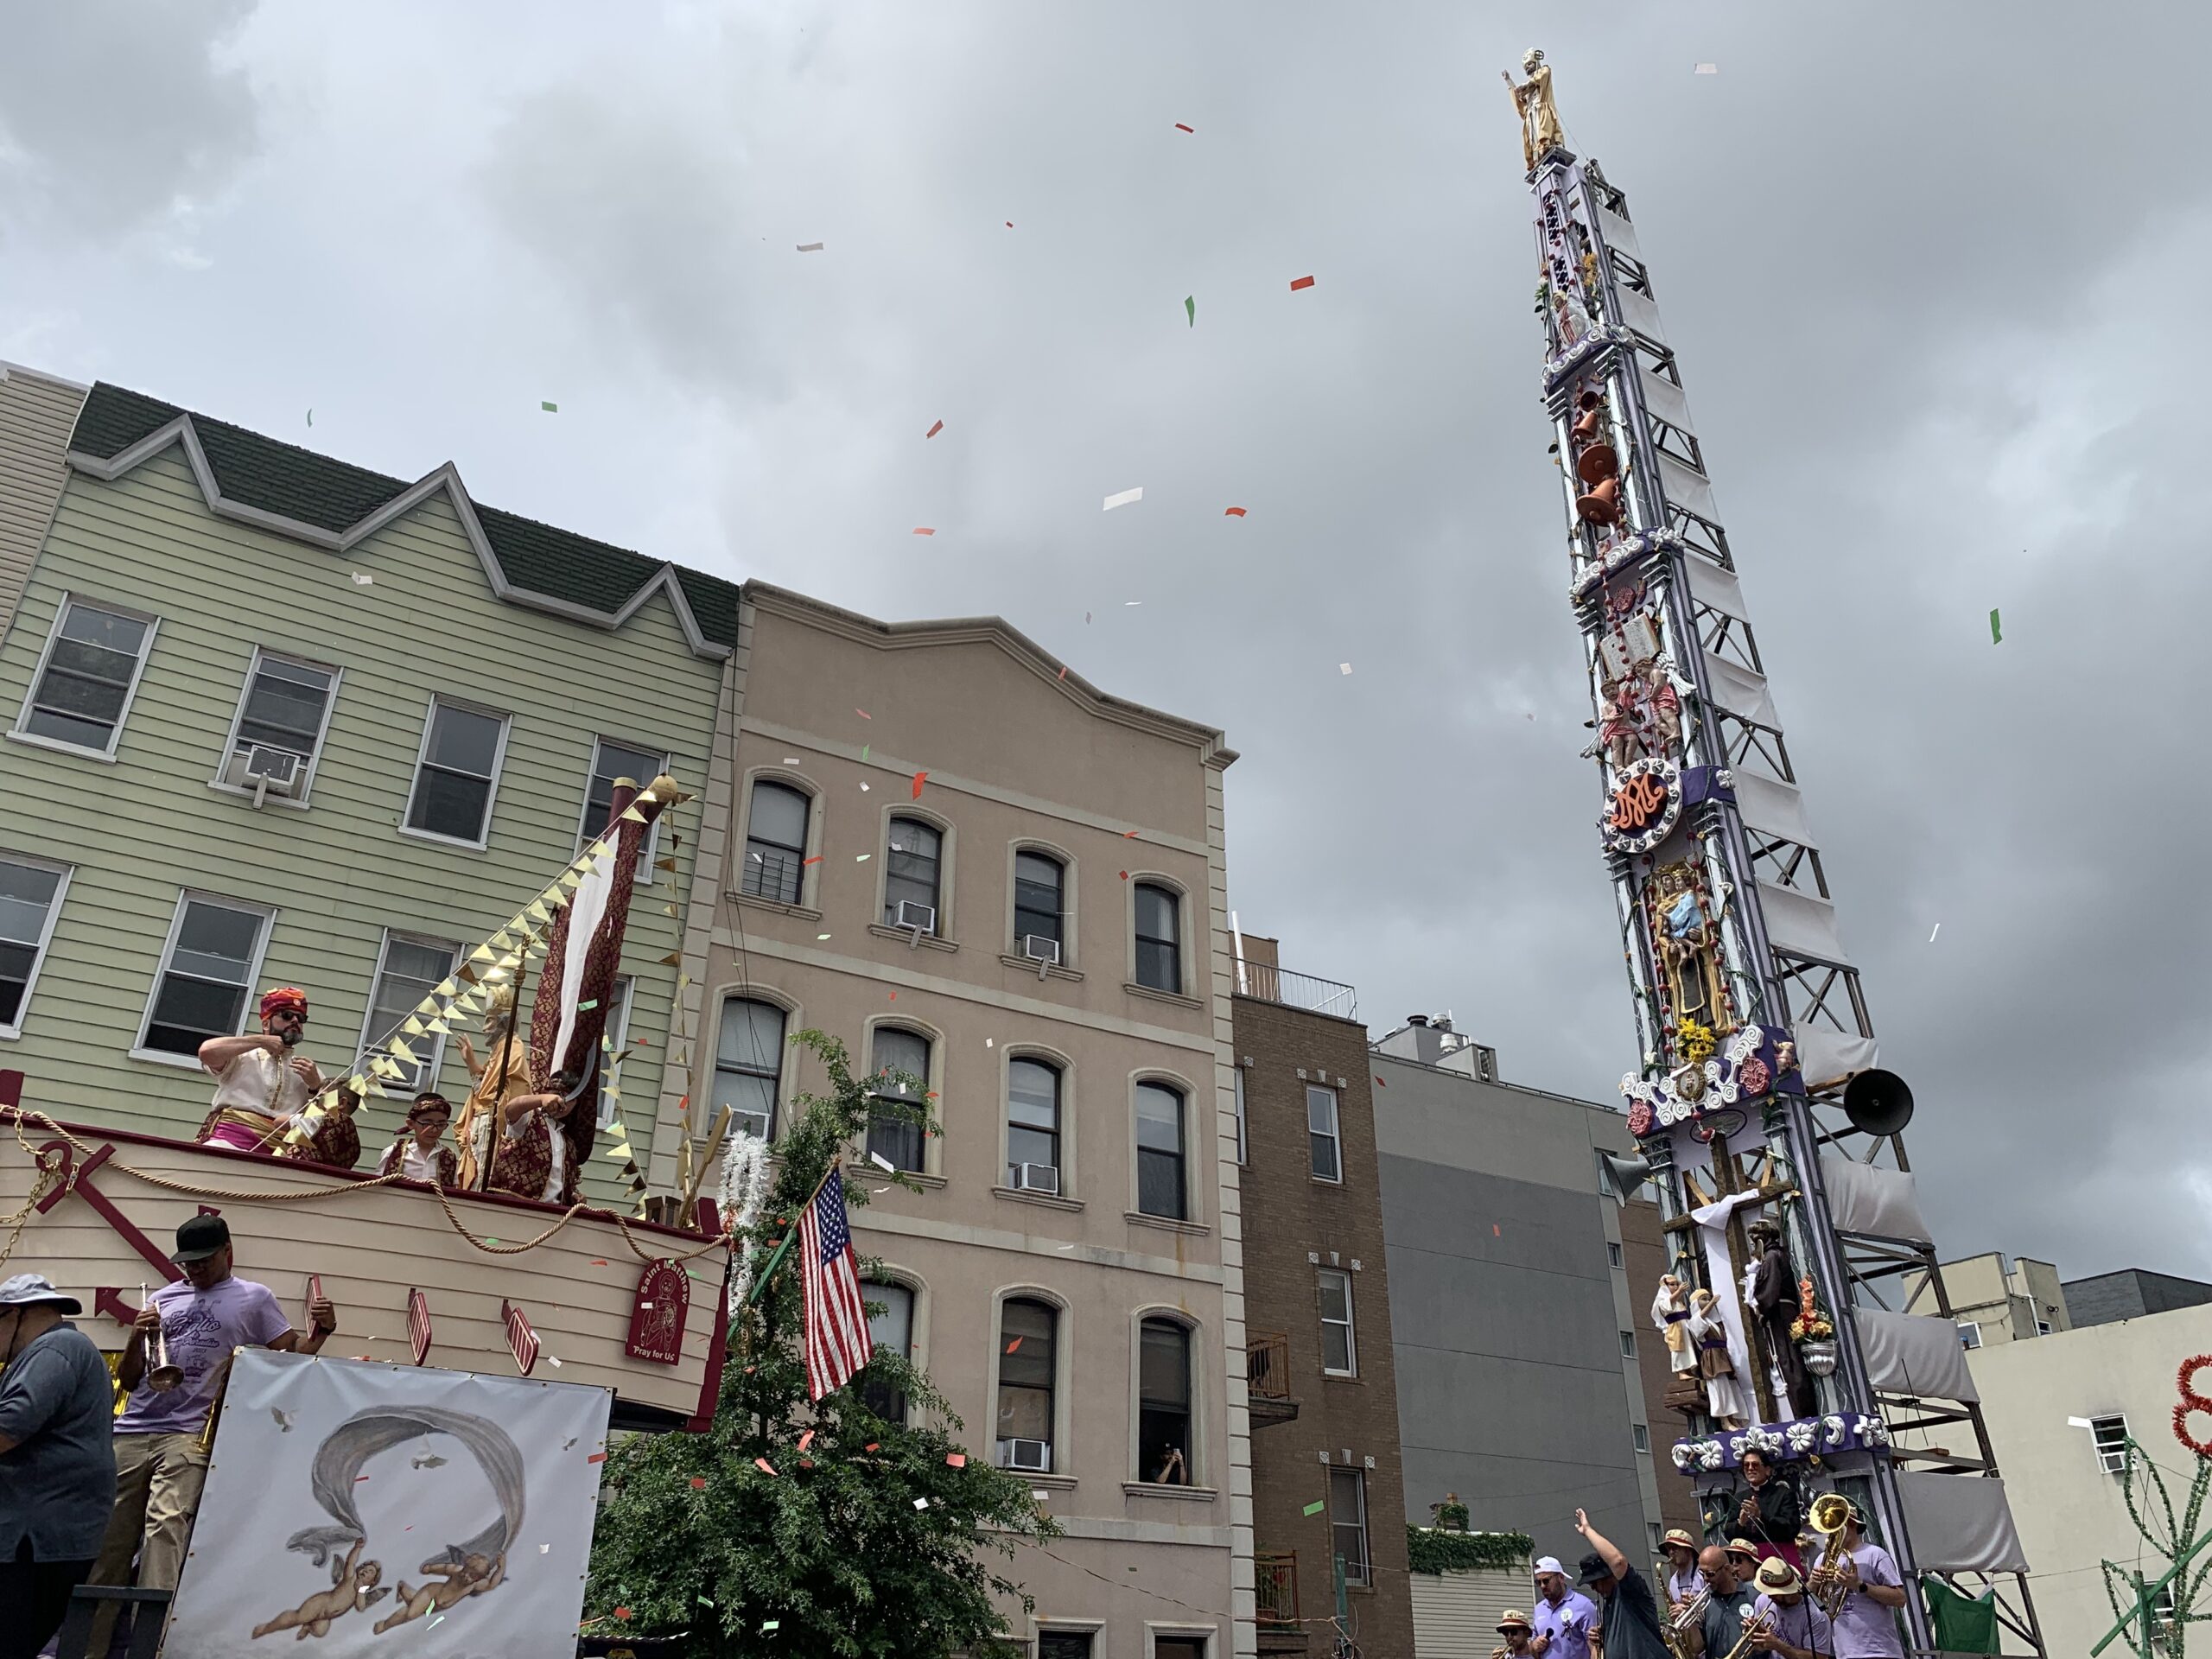 The Giglio stands over the crowd in front of a cloudy sky, facing another structure with a wooden boat on it.